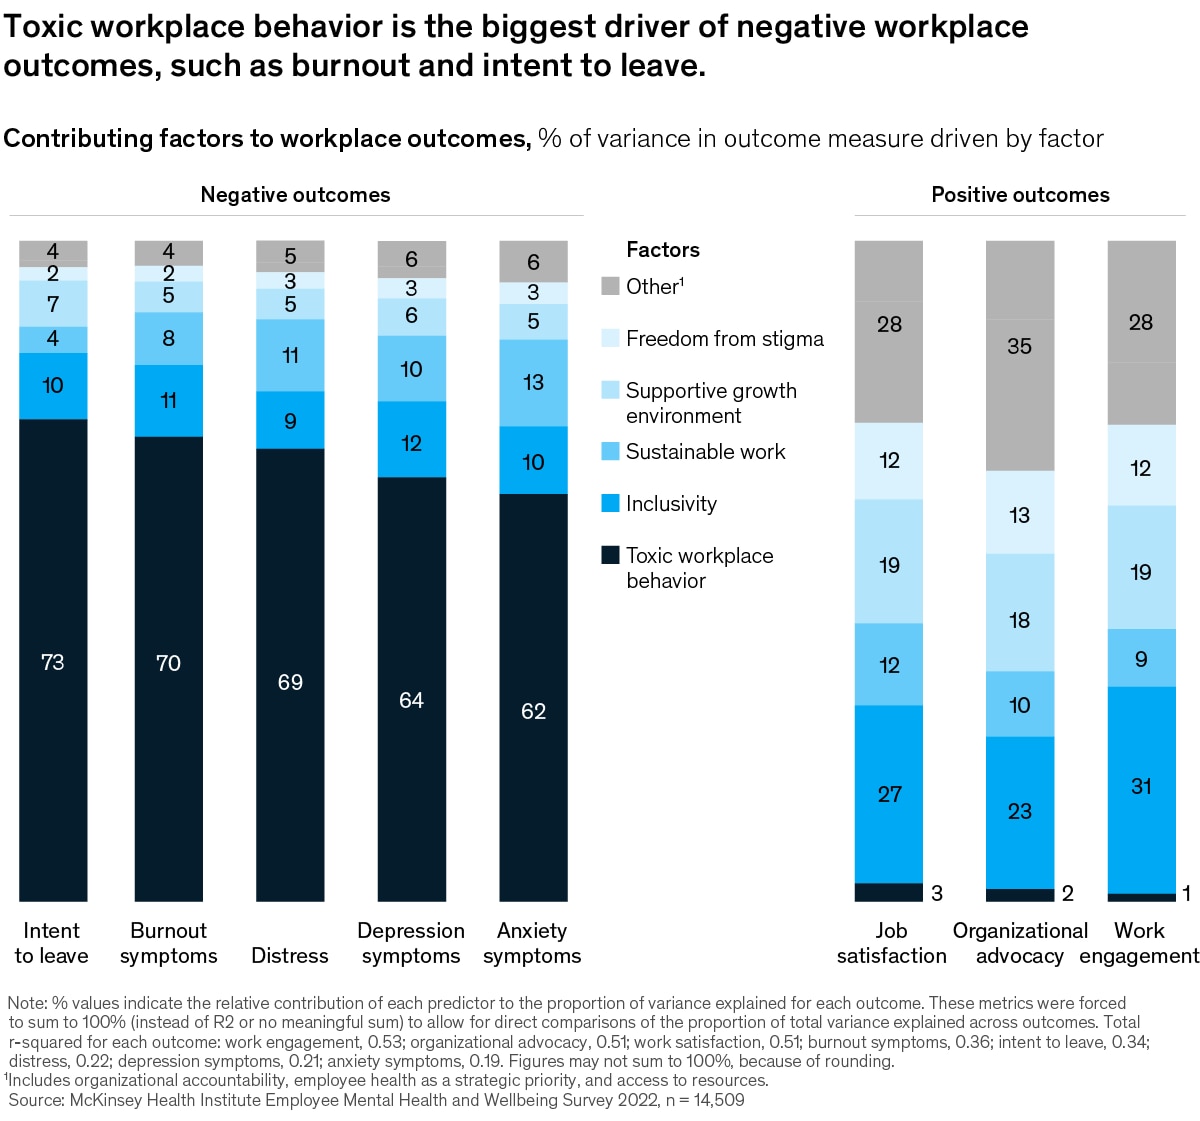 Chart detailing that toxic workplace behavior is the biggest driver of negative workplace outcomes, such as burnout and intent to leave